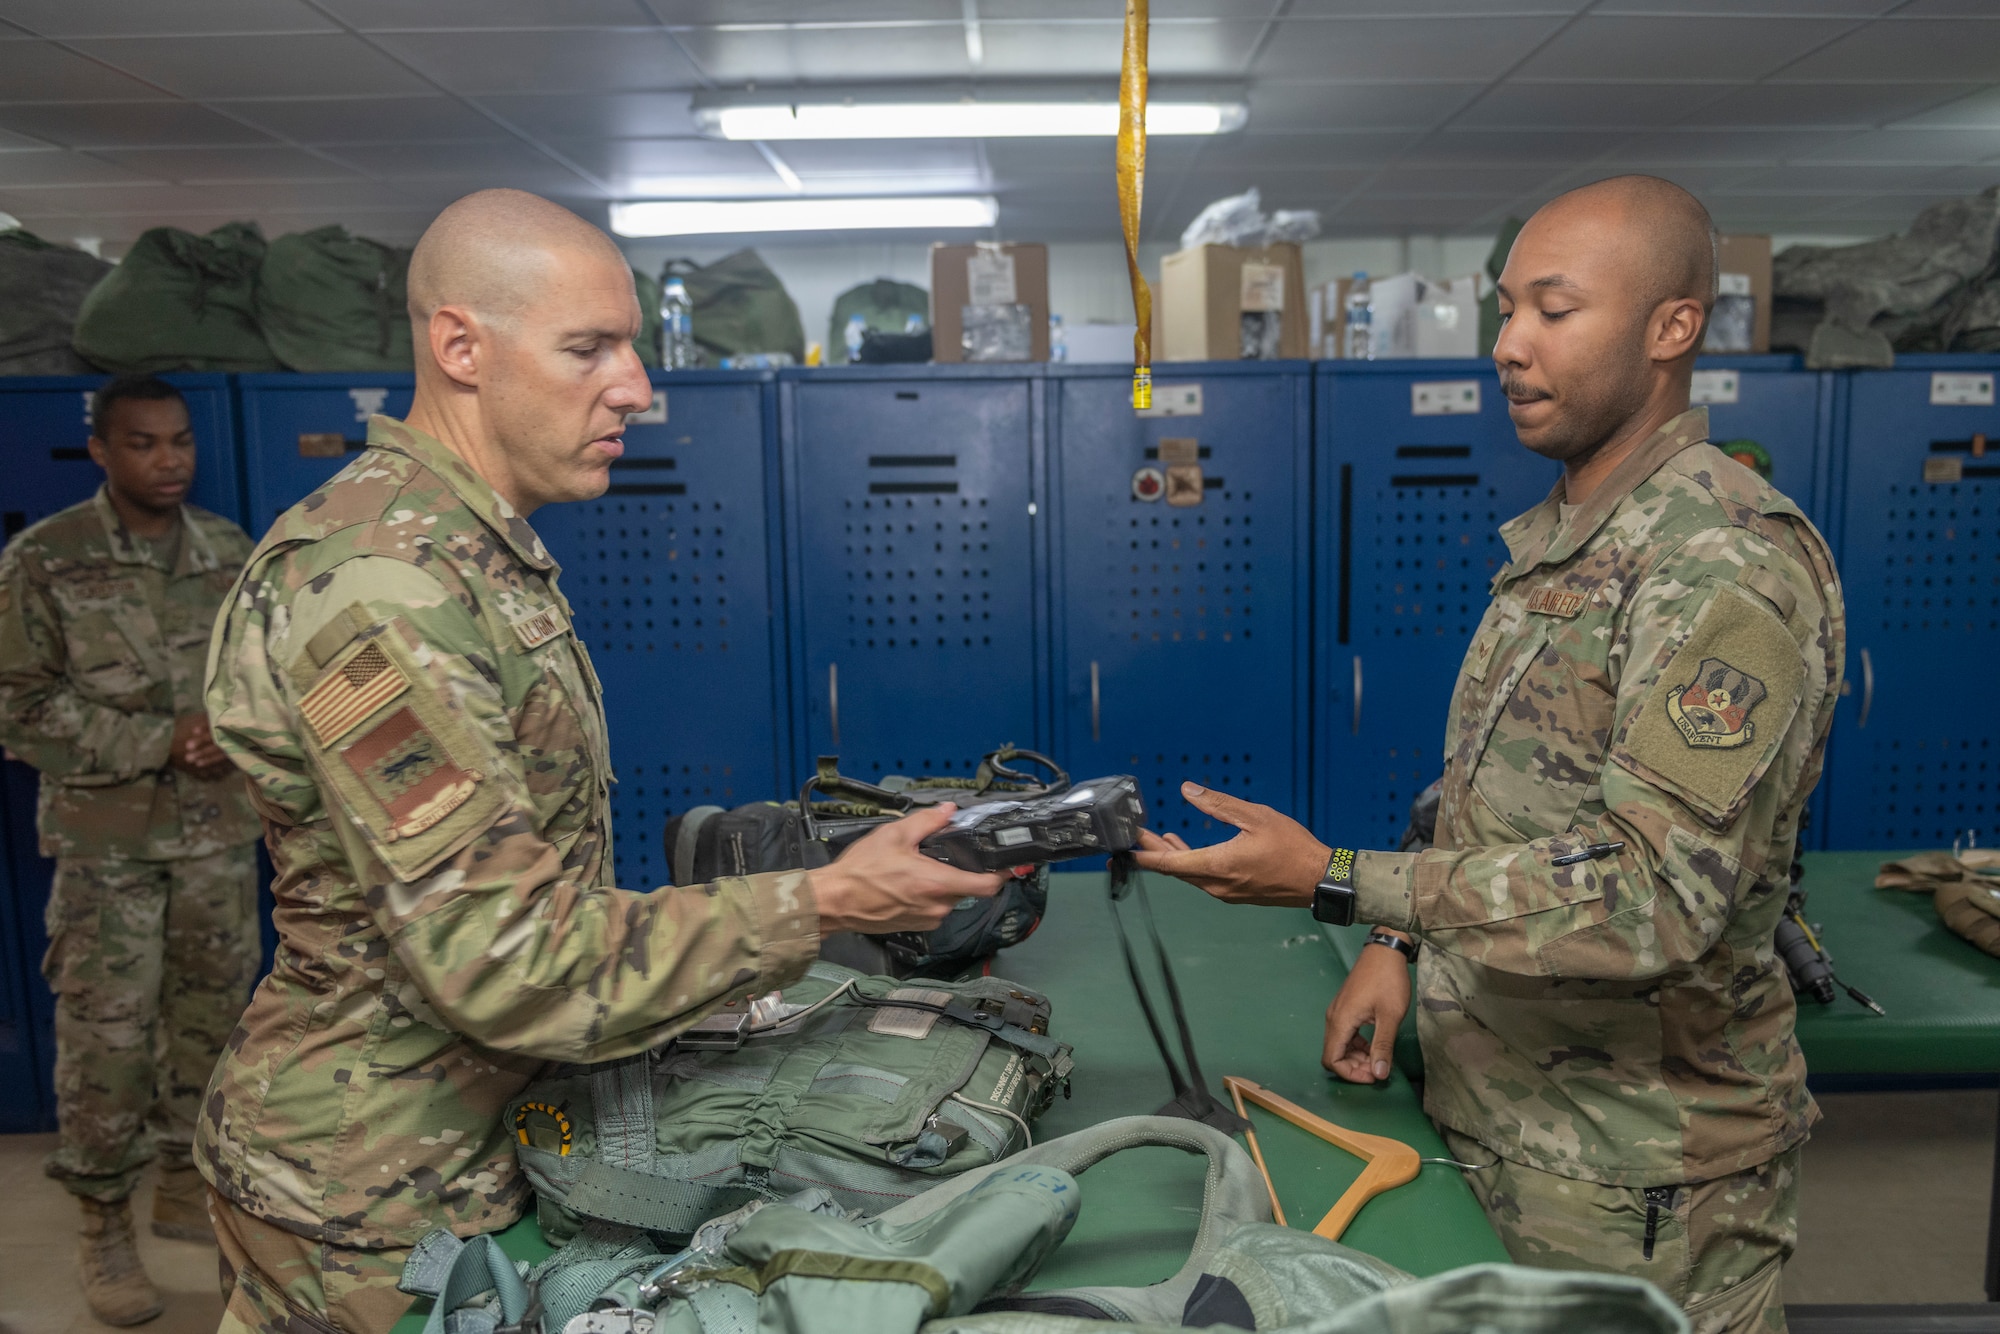 U.S. Air Force Senior Airman Rodney Tucker, right, 494th Expeditionary Fighter Squadron aircrew flight equipment technician, explains to Chief Master Sgt. Sean Milligan, 332nd Air Expeditionary Wing command chief, how to activate a Combat Survivor Evader Locator Sept. 4, 2021, at an undisclosed location somewhere in Southwest Asia. Aircrew flight equipment technicians ensure pilots are equipped with the specific gear needed to perform their missions. (U.S. Air Force photo by Senior Airman Cameron Otte)